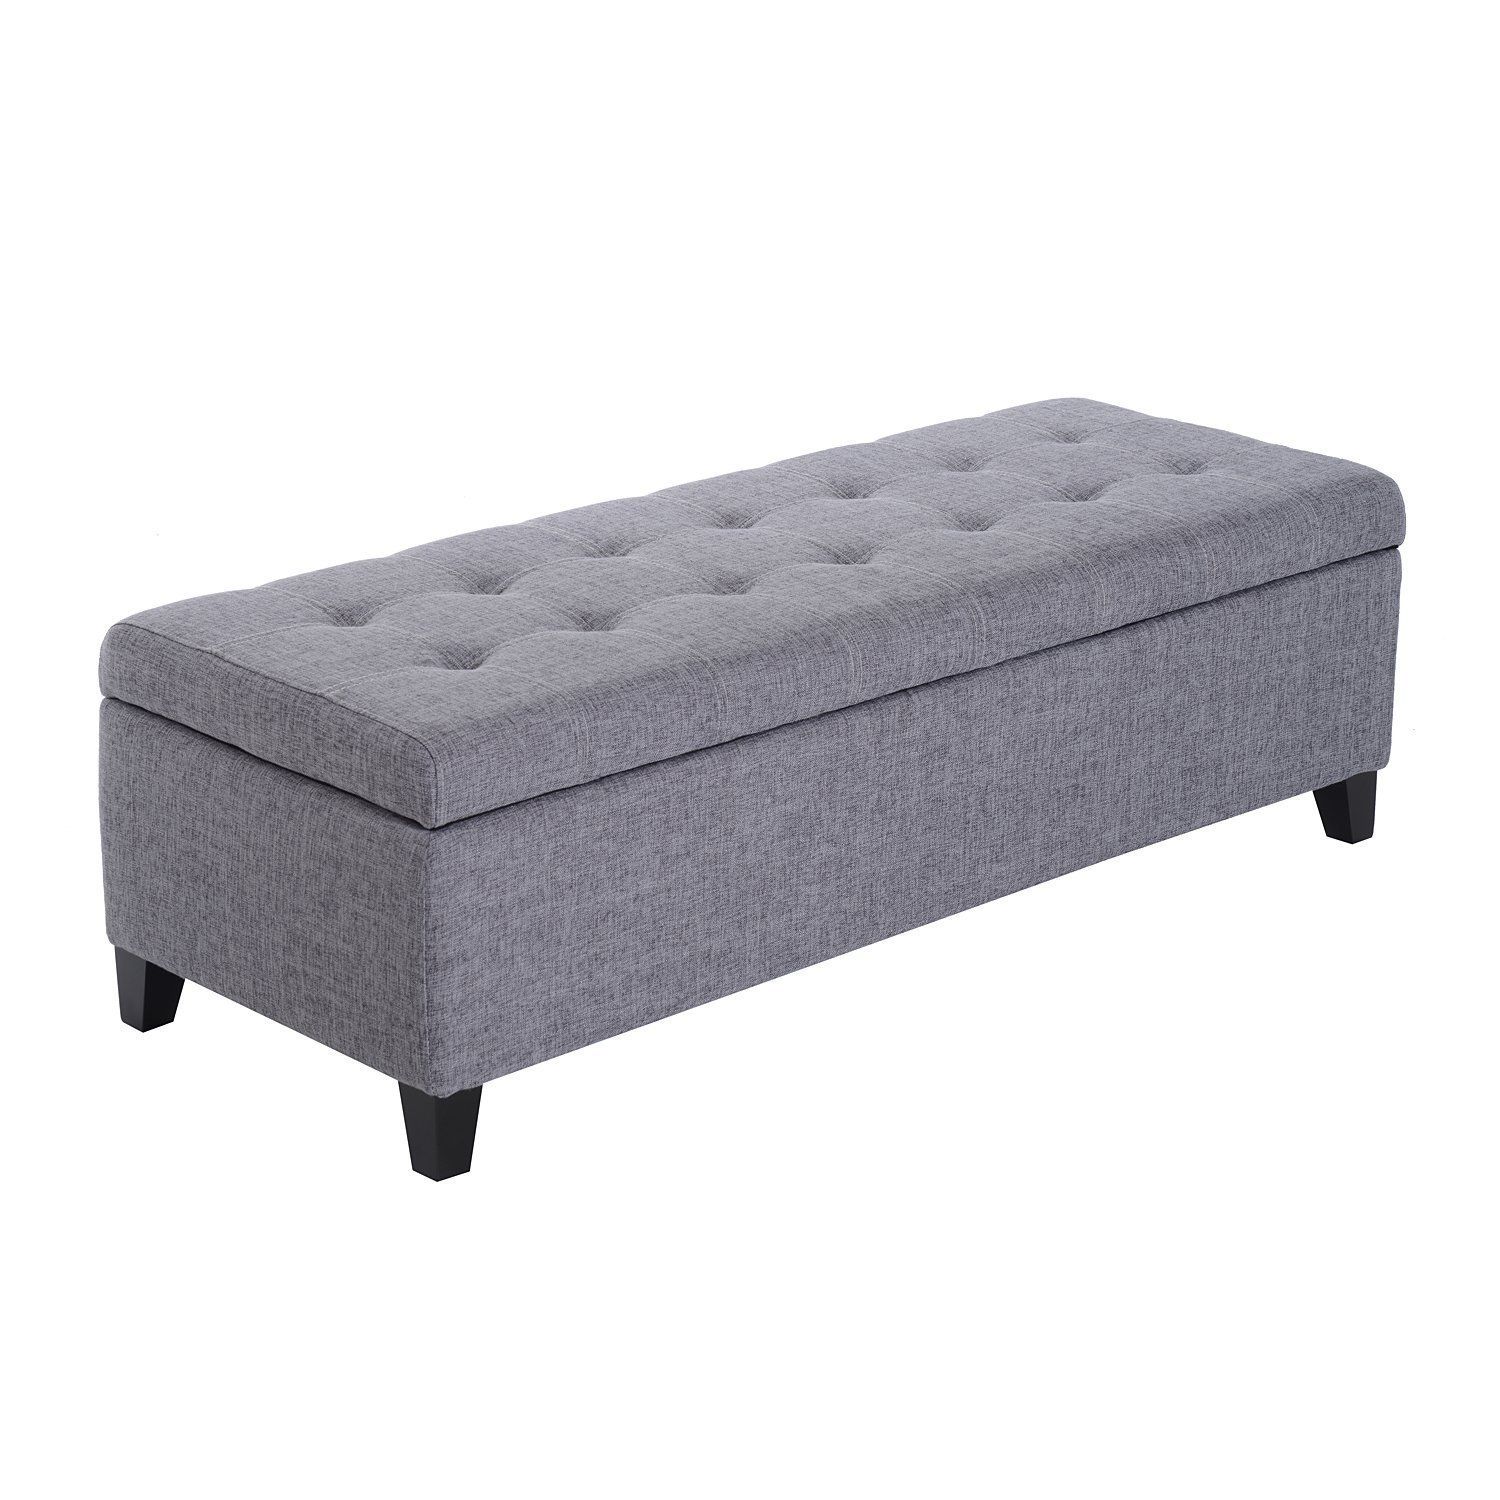 Homcom 51" Large Tufted Linen Fabric Ottoman Storage Bench With Soft For Fabric Tufted Storage Ottomans (View 1 of 20)